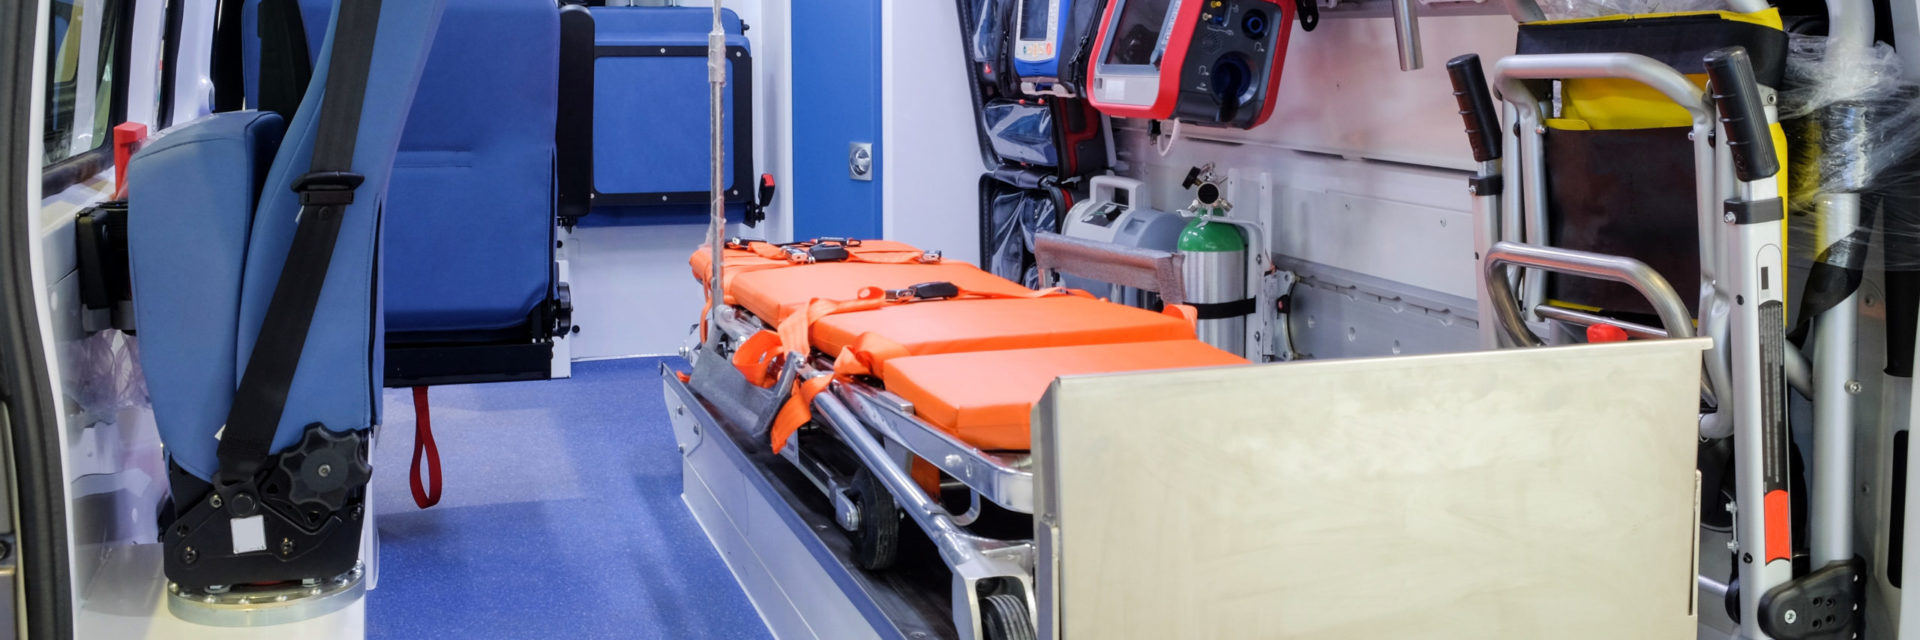 Inside An Ambulance With Medical Equipment For Helping Patients Before Delivery To The Hospital.